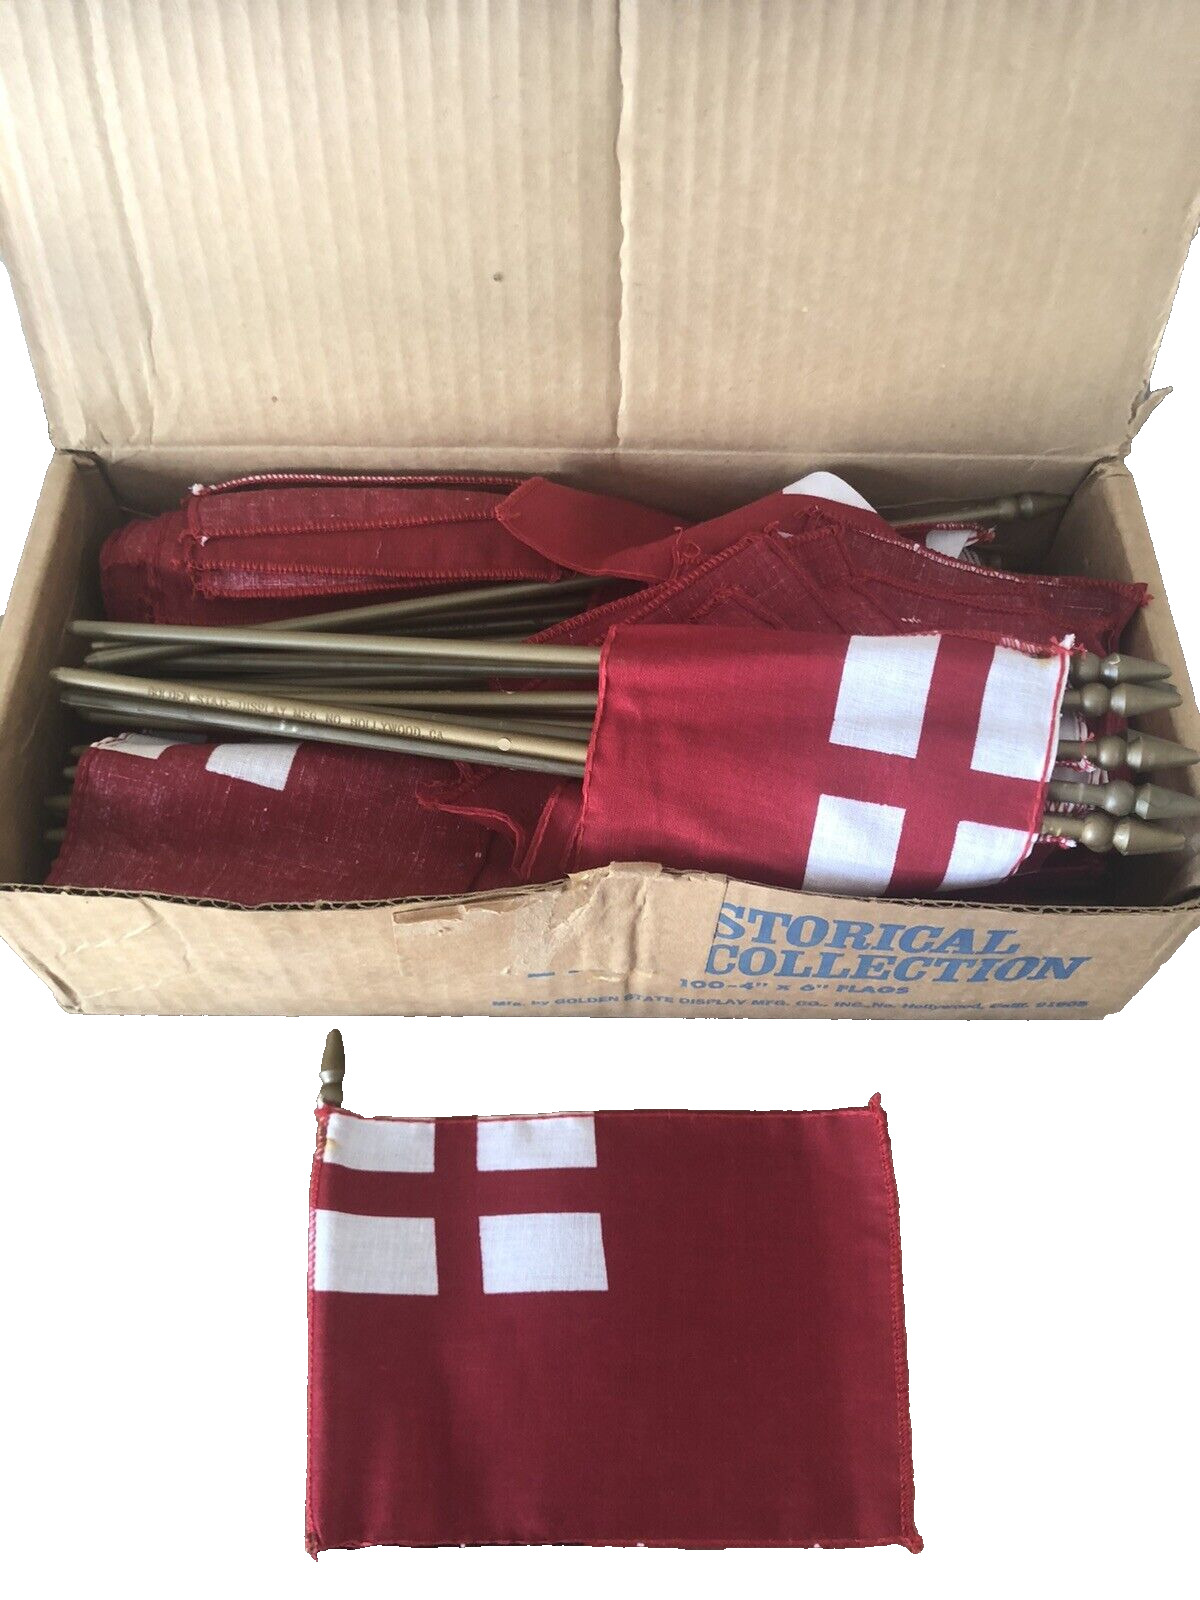 NOS 2 Boxes Red Ensign England Mini Flags Golden State Display 4”x6” 100 ea. box